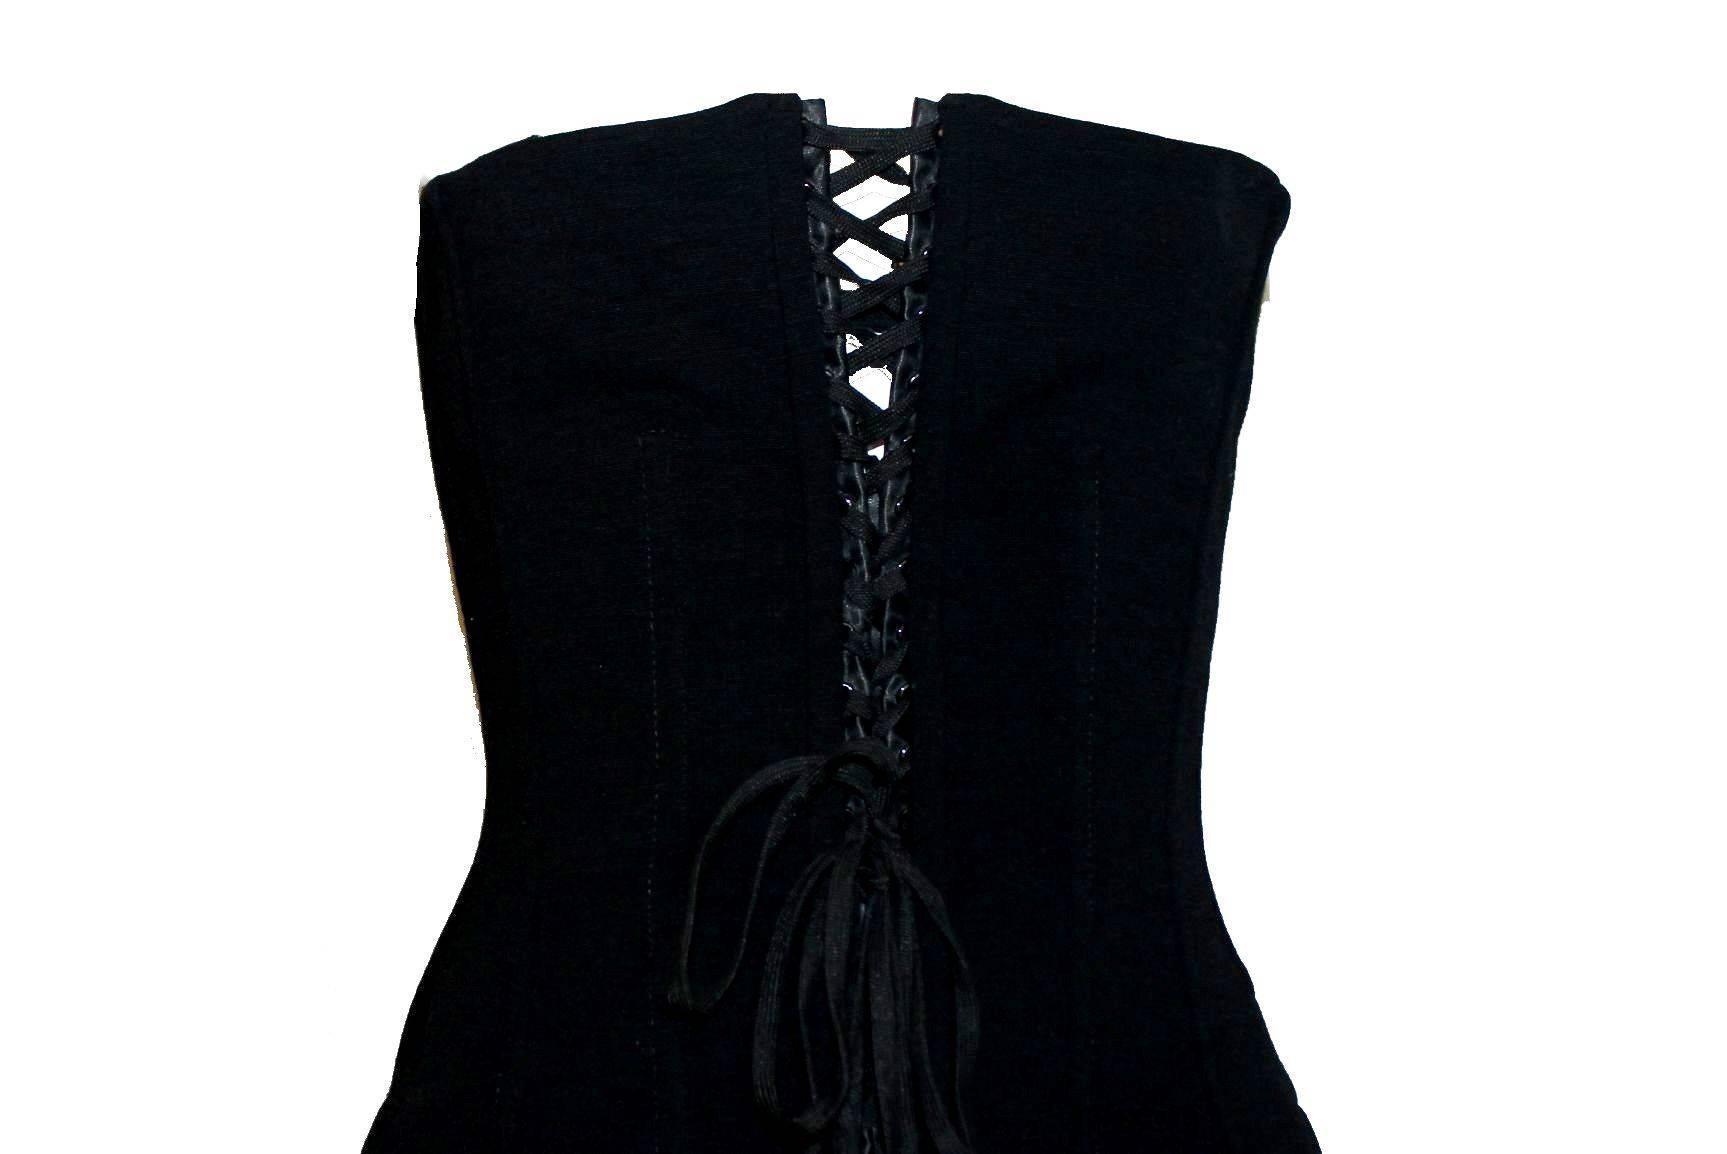 Timeless black dress by Dolce & Gabbana
Stunning corset part with lace up detail in front
Corset fully boned for a perfect fit
Two side pockets
Closes with zip in back
Lined with black silk
Made in Italy
Dry Clean Only